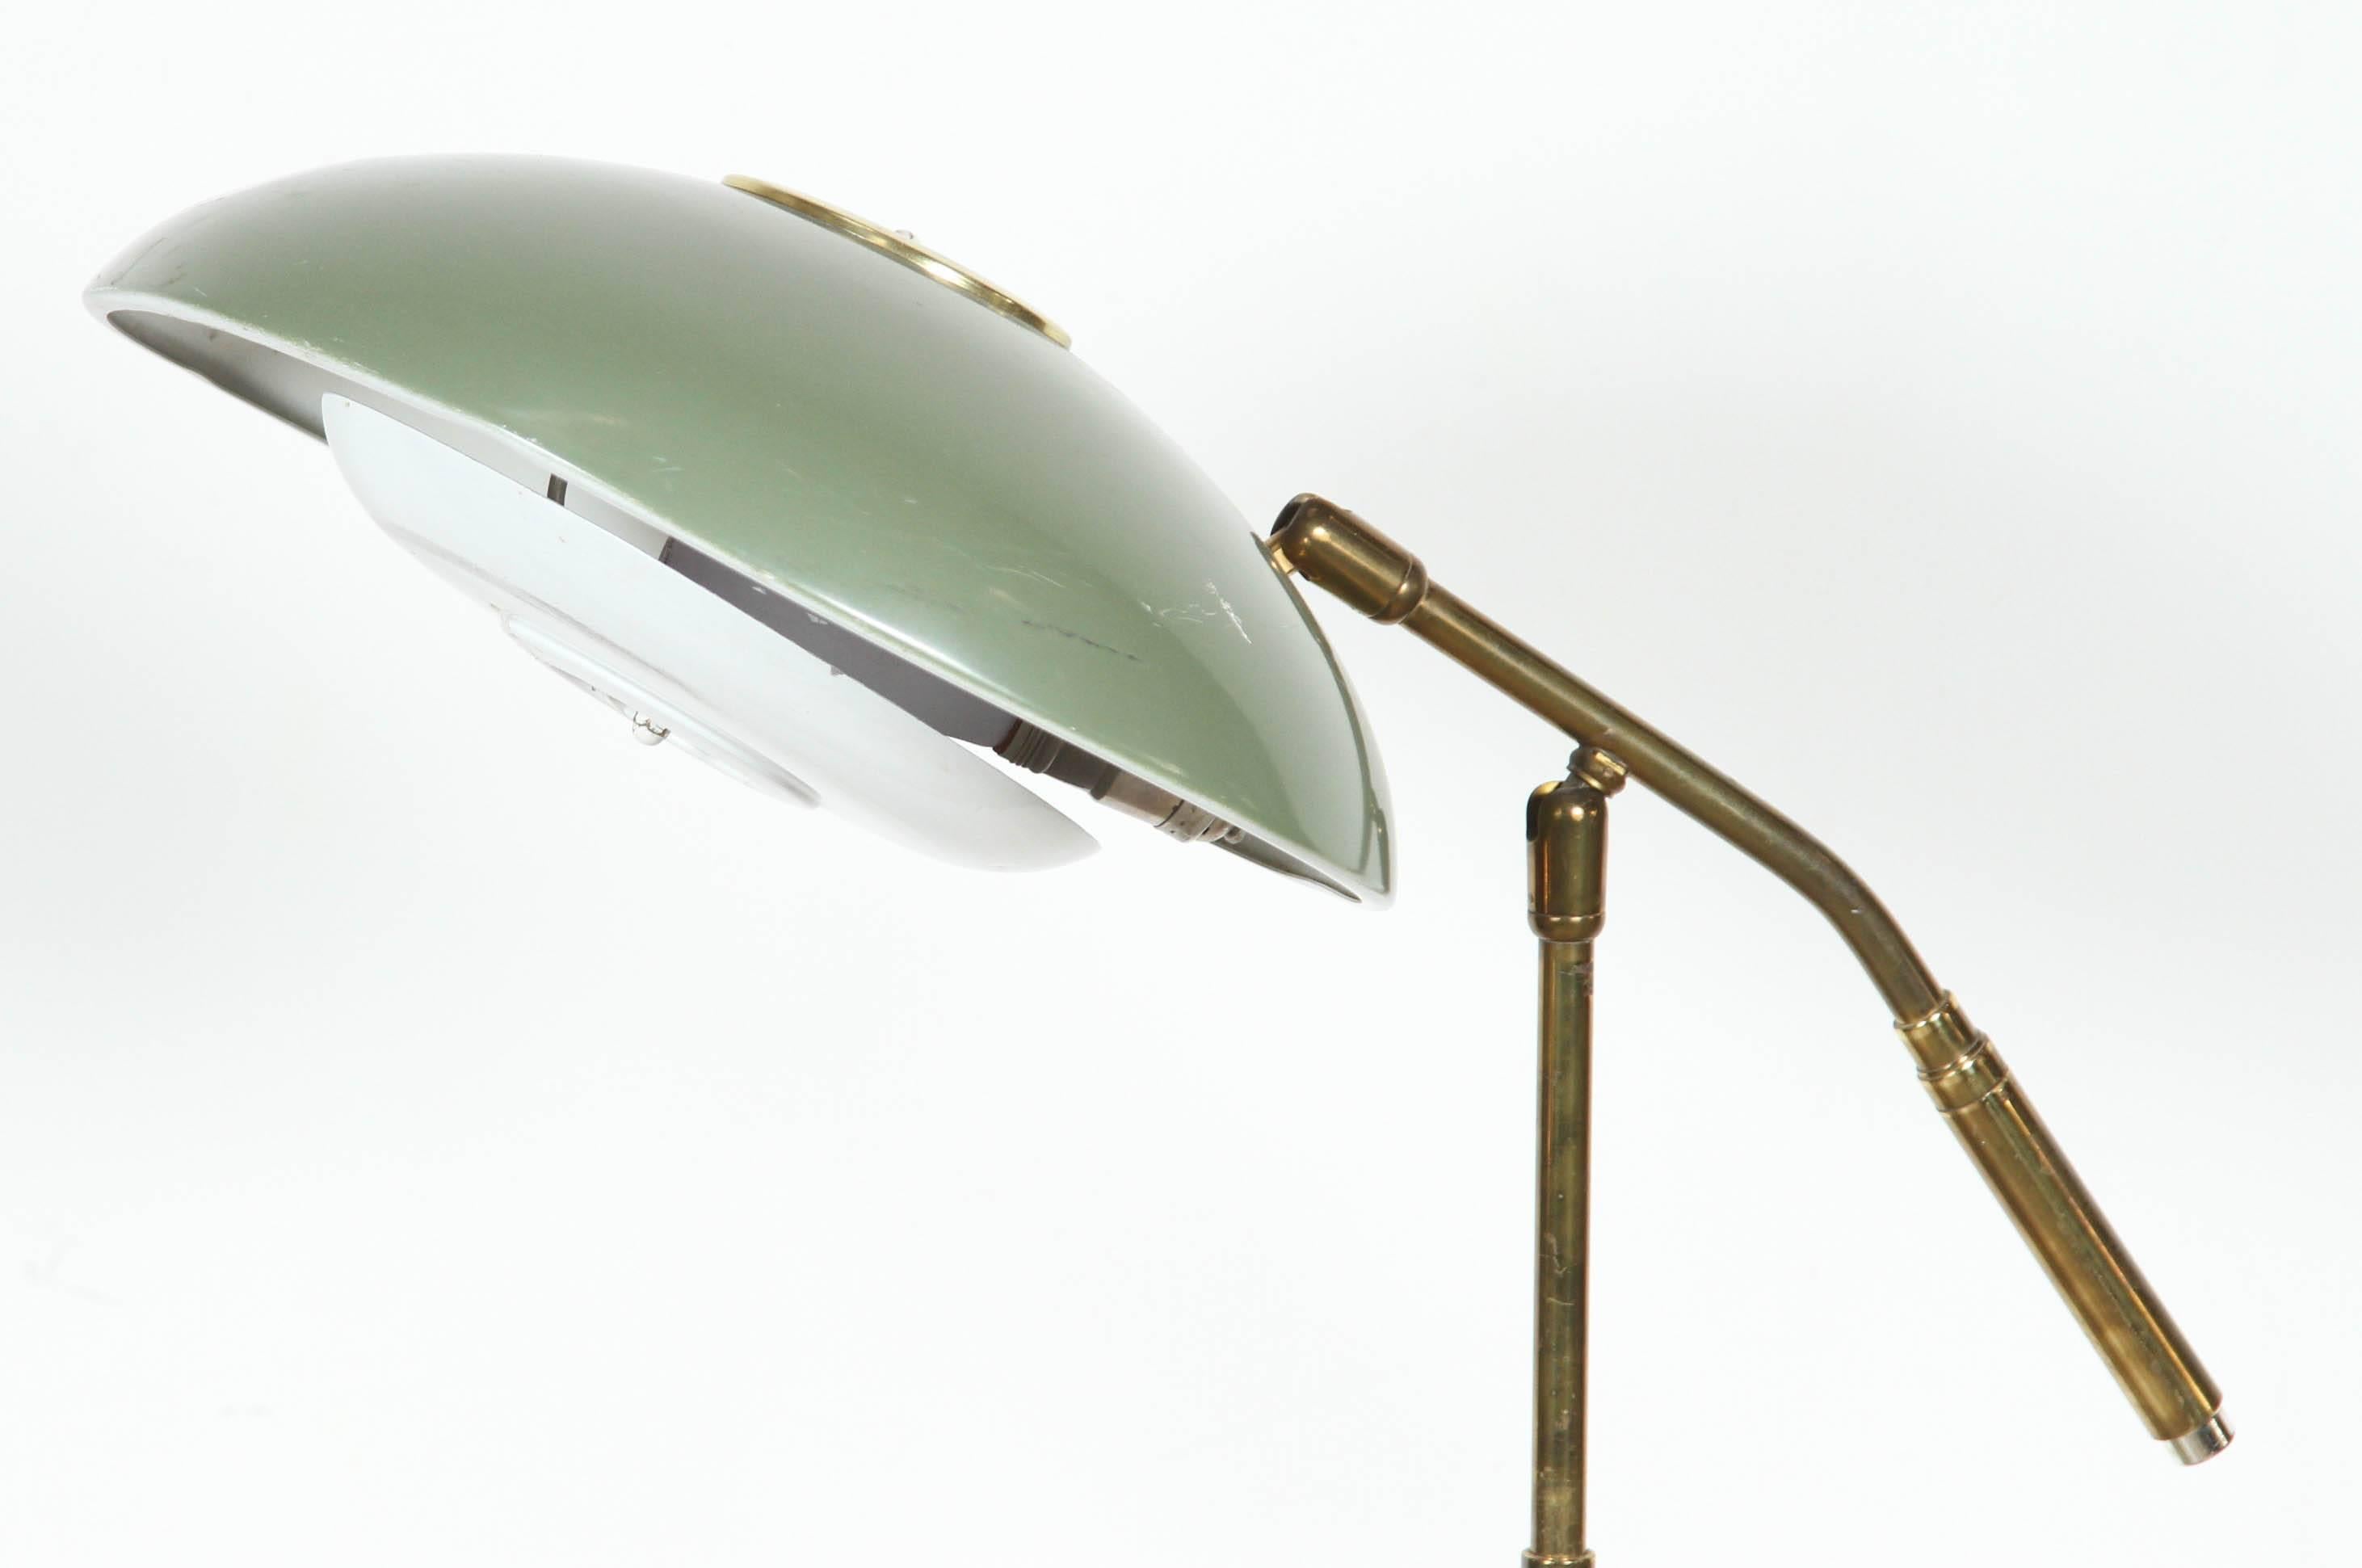 Mid-Century Modern Gerald Thurston floor lamp for Lightolier.
Enameled green metal with brass details and perforated metal.
Pole extends to 52 inches. Shade swivels in all directions. 
Base is 10" diameter.
Shade is 12" diameter.